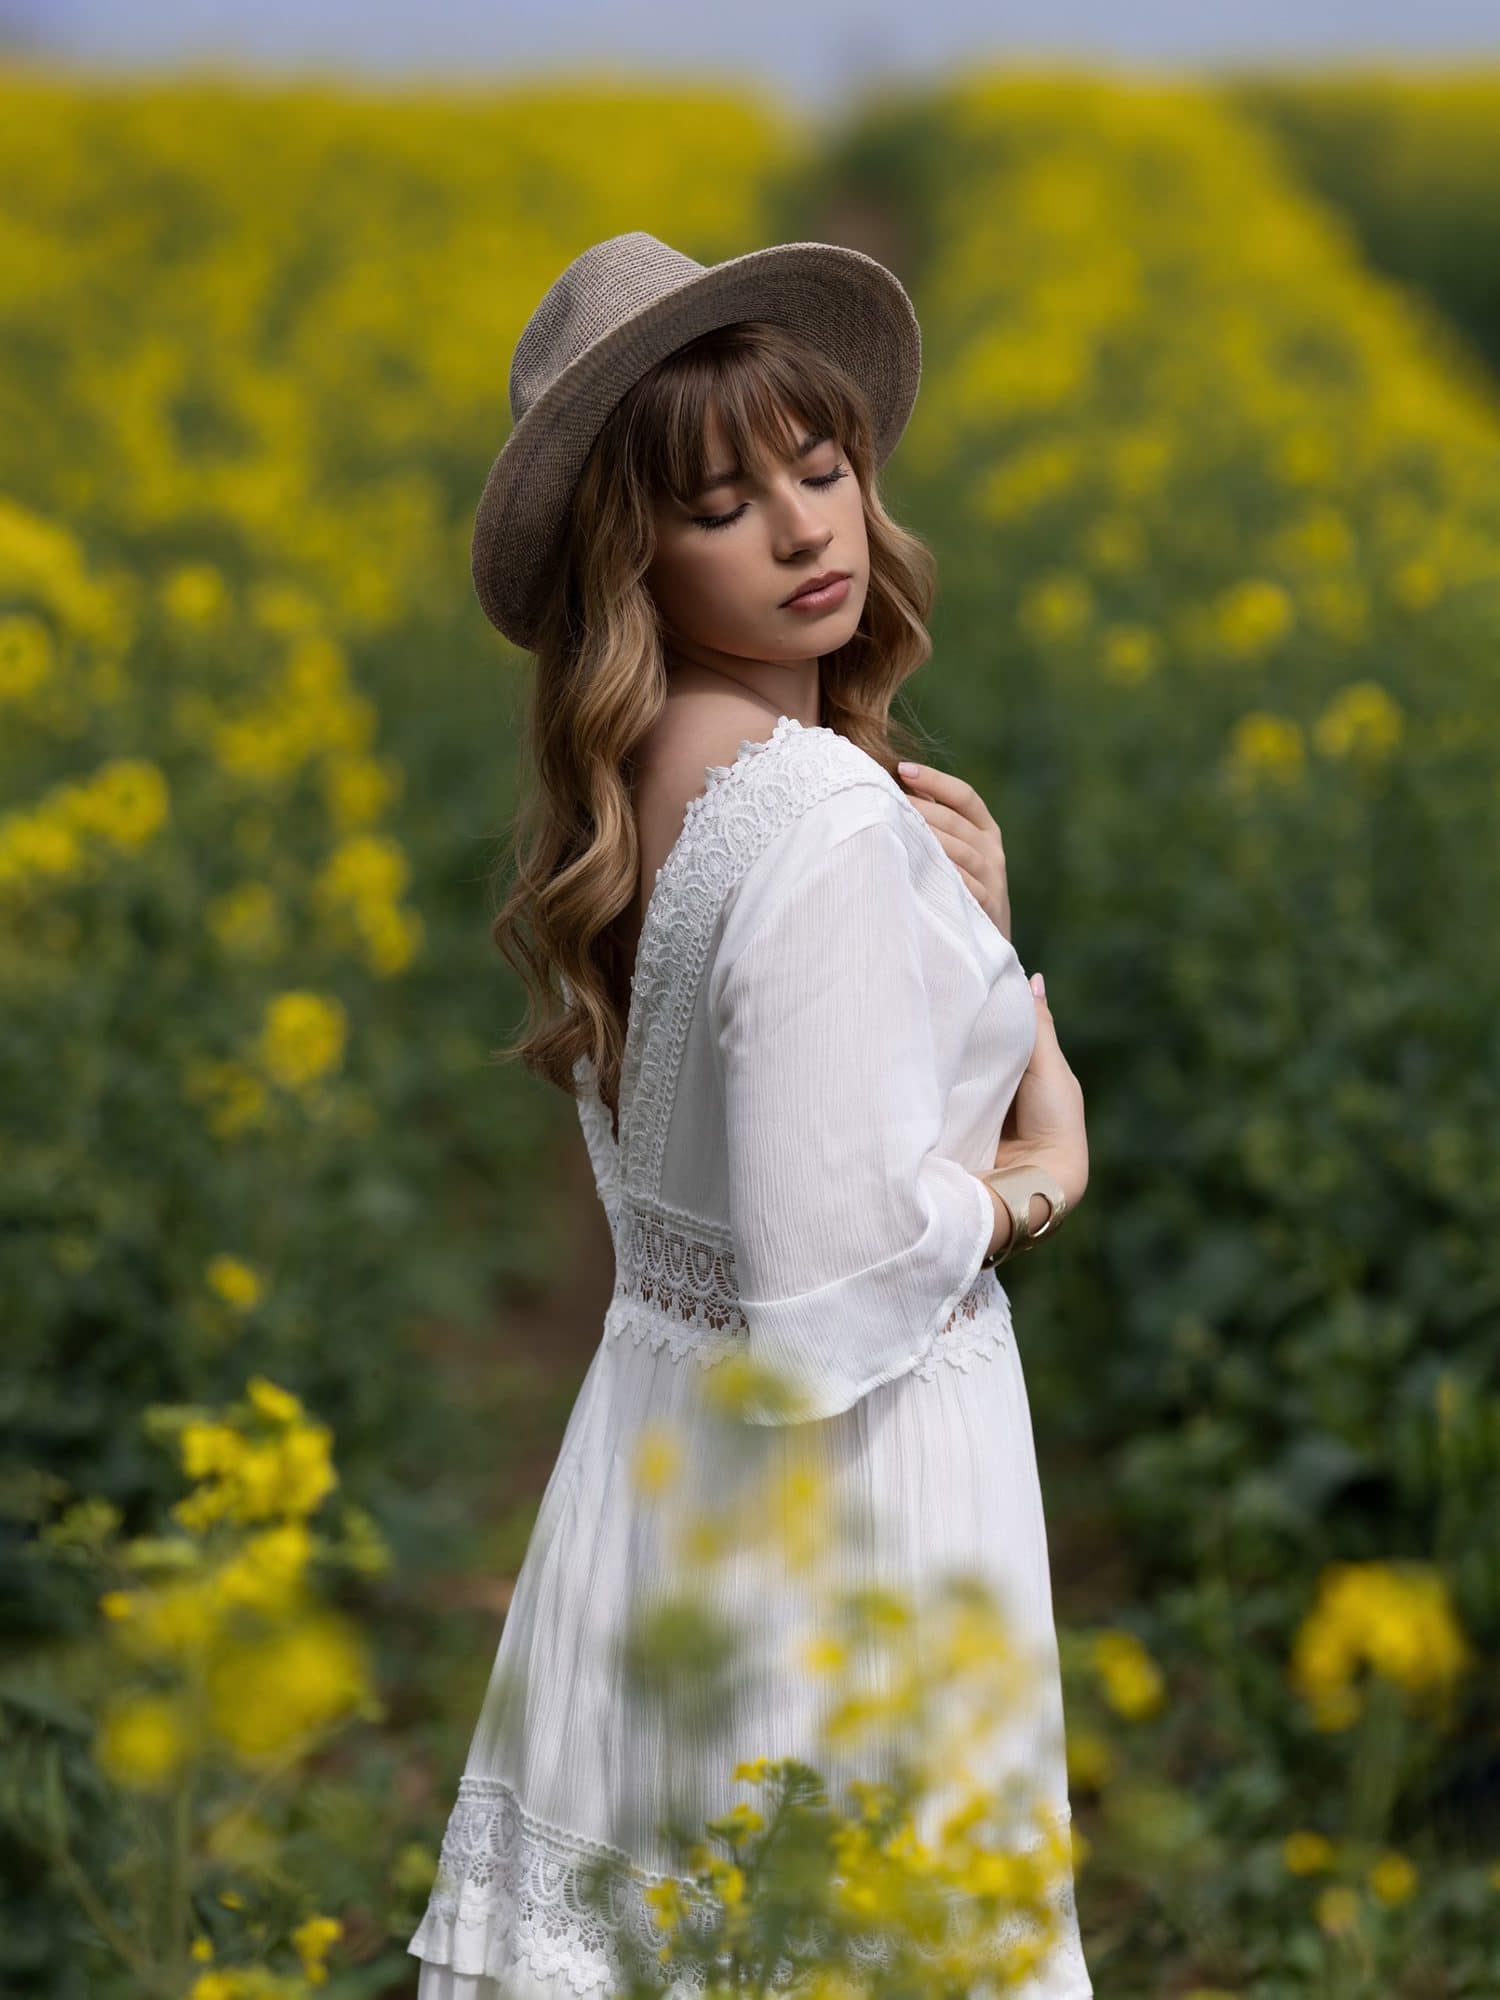 Teenage girl in a white dress stands with her face to the sun in a Rape Seed Field